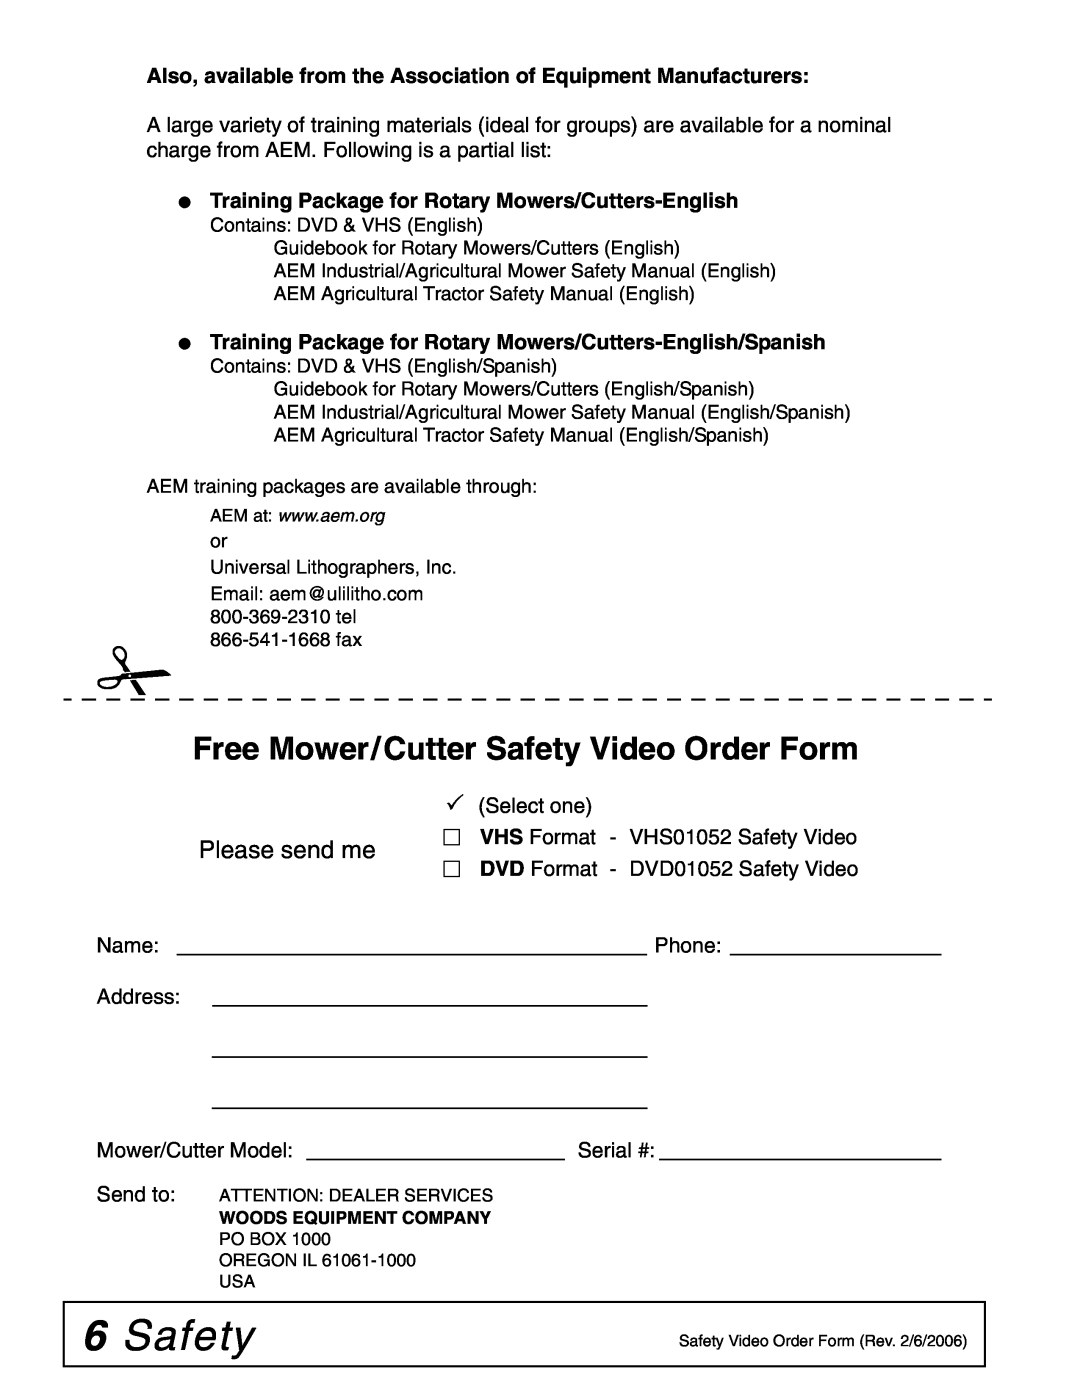 Woods Equipment BB8400X Free Mower/Cutter Safety Video Order Form, Please send me, Select one, Name Phone Address 